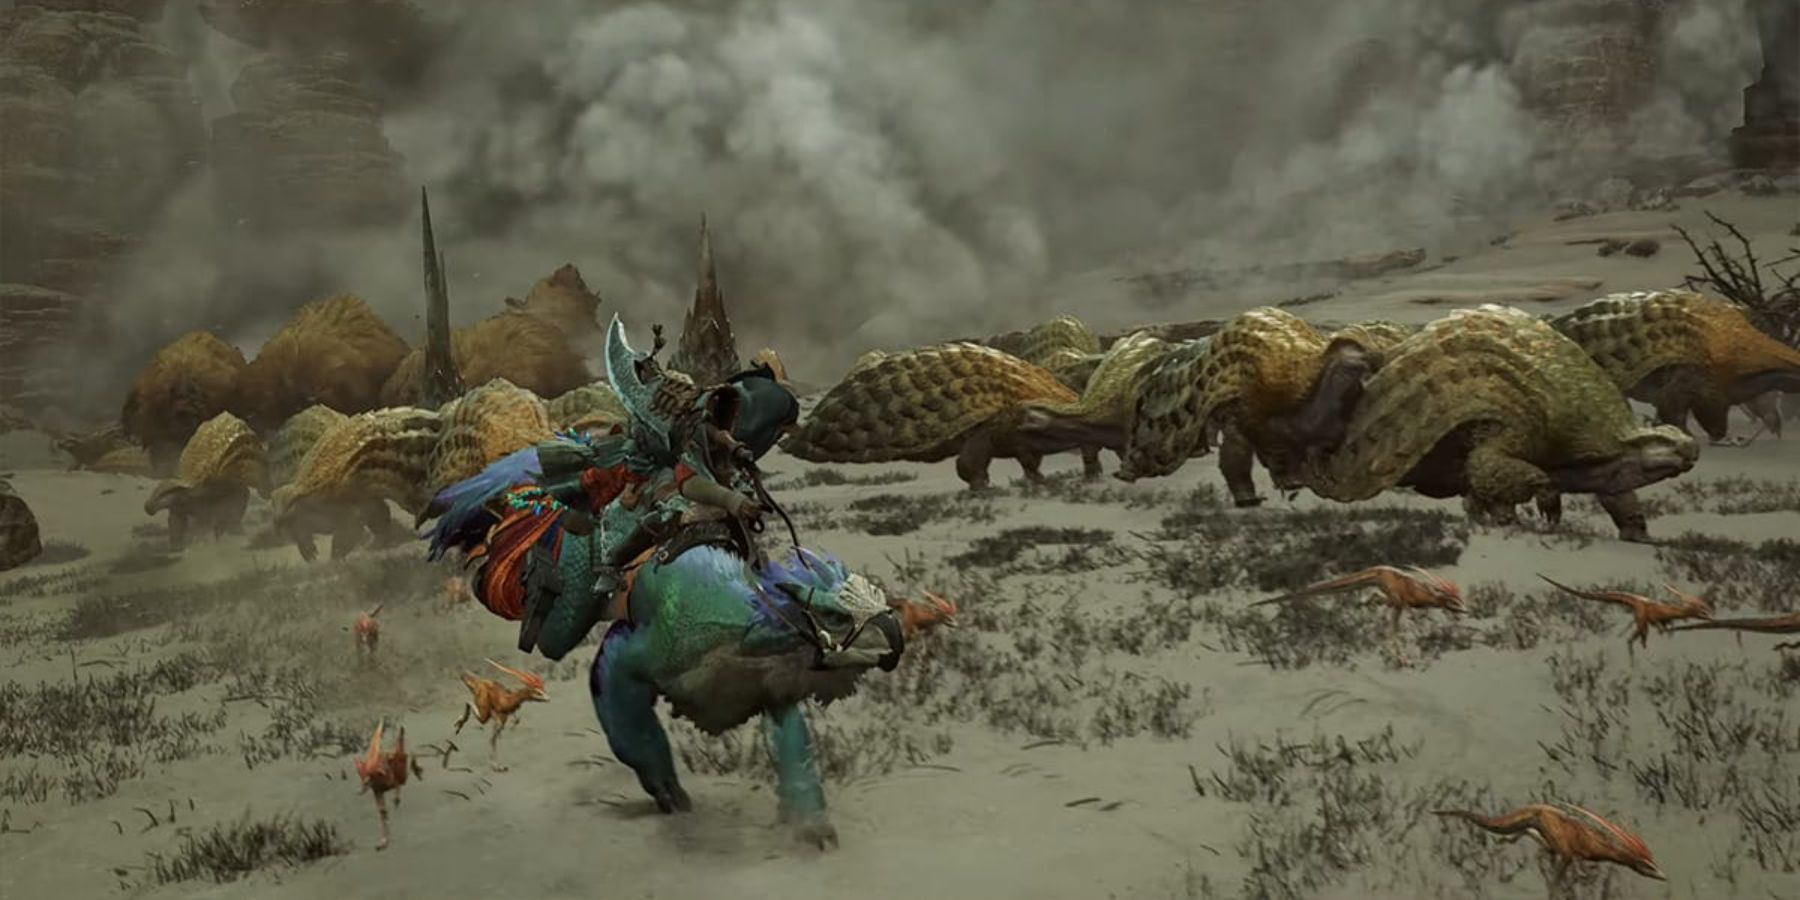 Monster Hunter Wilds announced at The Game Awards 2023! (2025